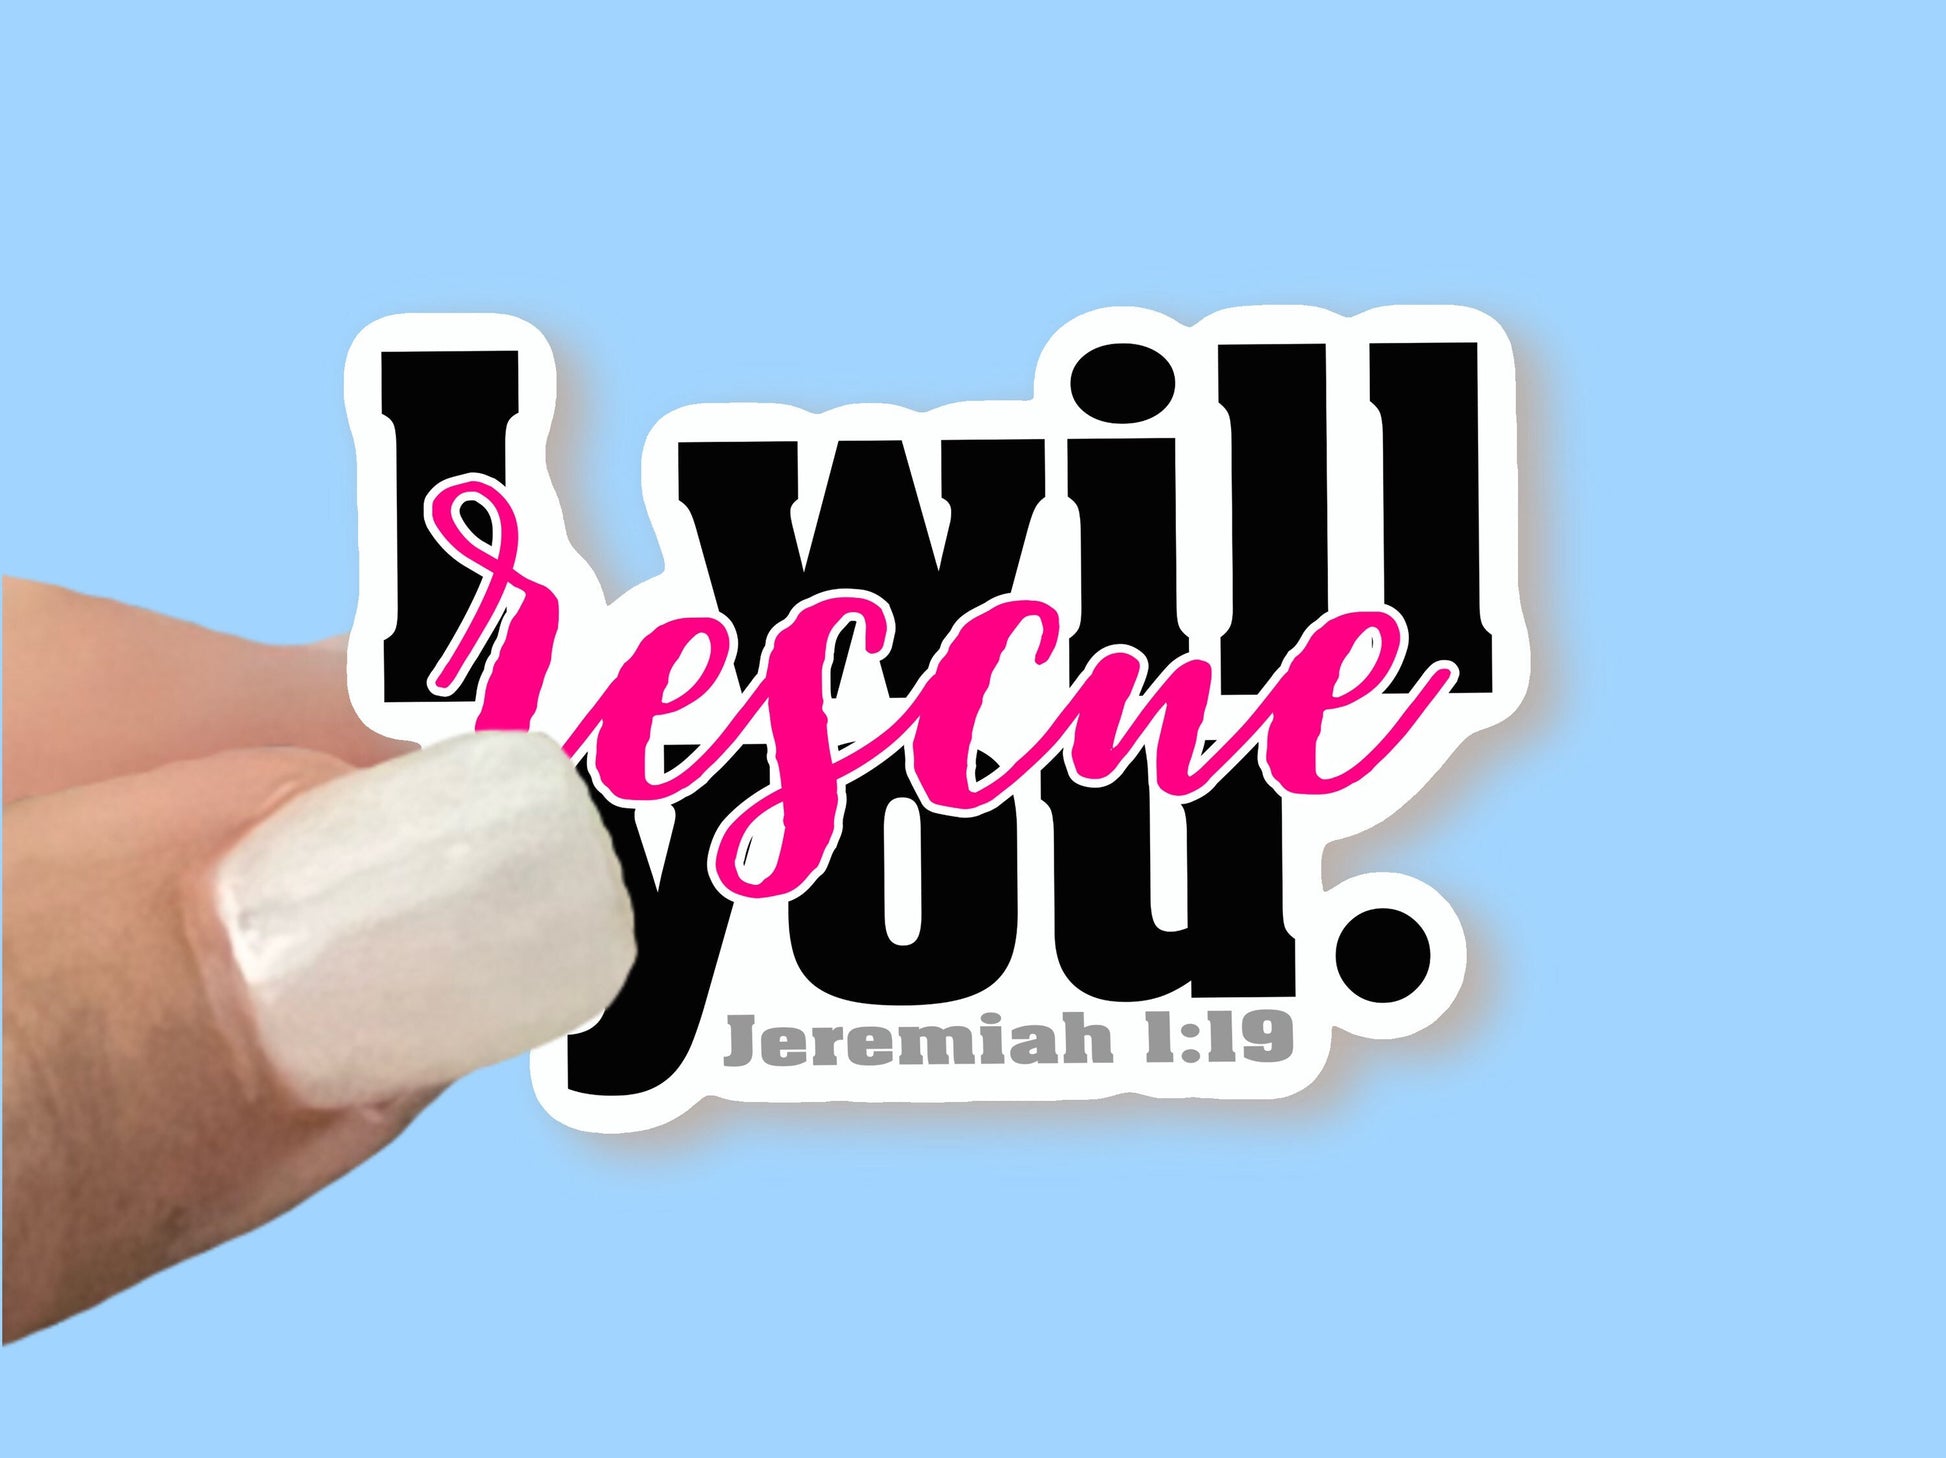 I will rescue you - Christian Faith UV/ Waterproof Vinyl Sticker/ Decal- Choice of Size, Single or Bulk qty